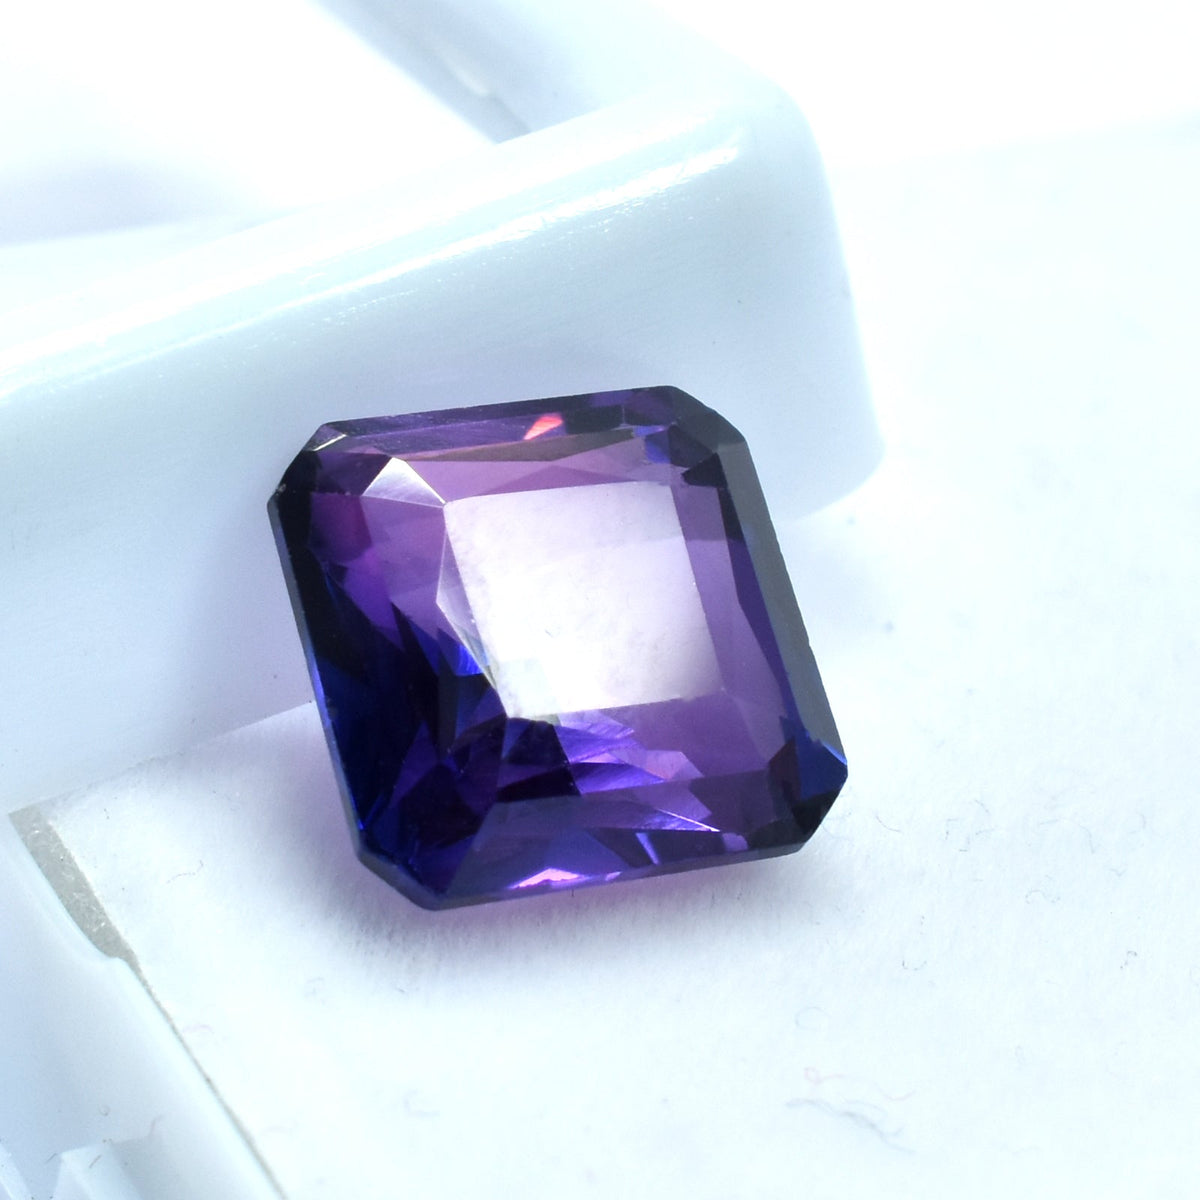 Offering The Beauty And Durability !!! Natural Certified Loose Gemstone 7.65 Carat Purple Color Change Sapphire Square Shape | Free Shipped & Gift | Bumper Offer